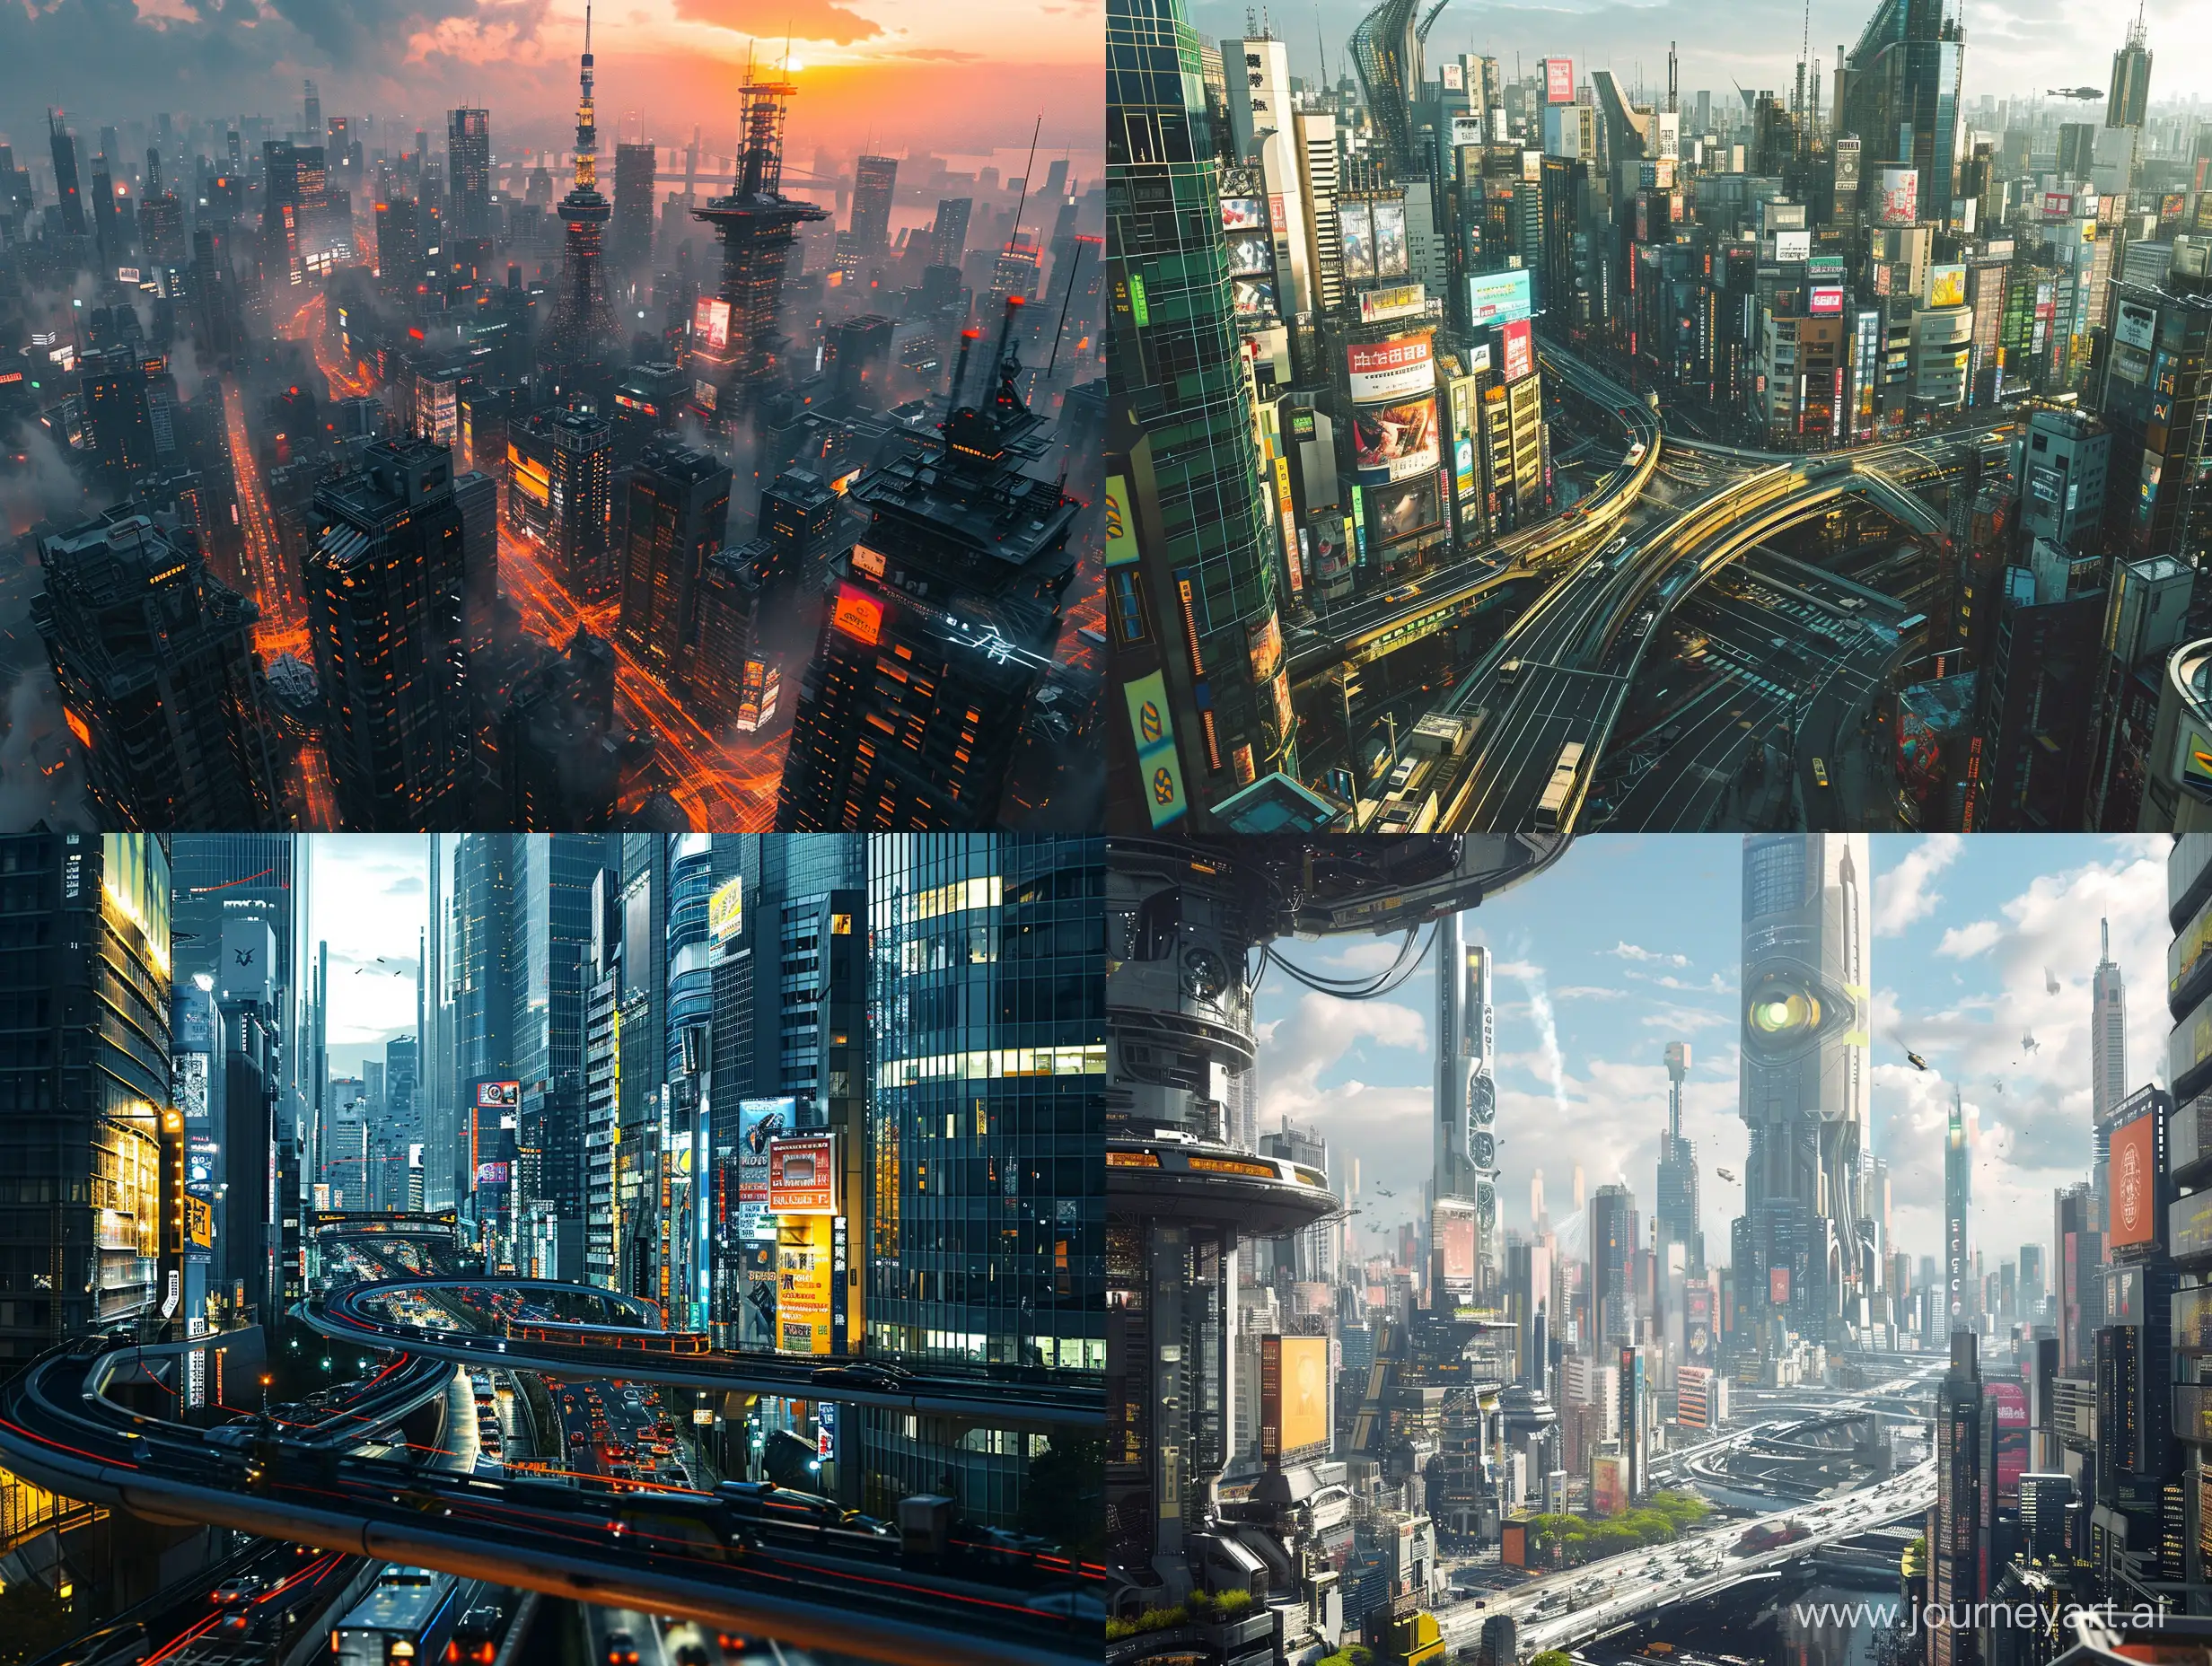 Futuristic city, the detail on the image is insanely perfect, sci fi, modern, busy environment, naturalism, vibrant, transportation, cinematic, soft visuals to match the mood, modern architectures, dystopian, ancient skyscrapers and buildings, residences, tokyo city, science fiction

